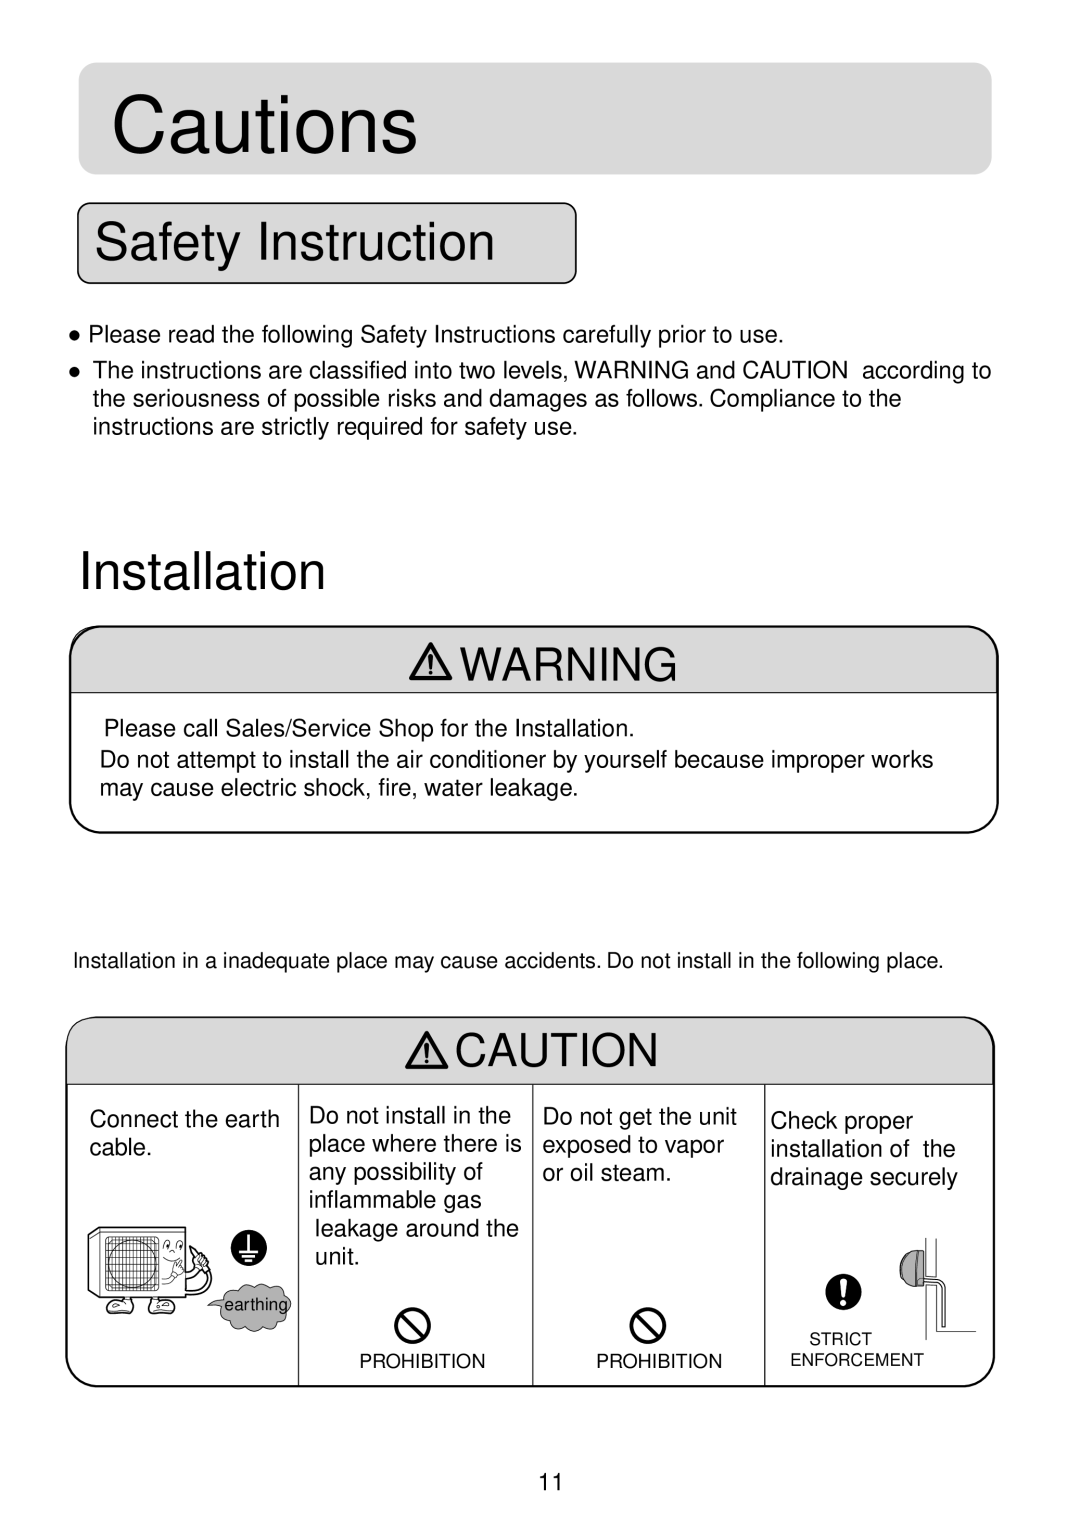 Haier HSM09HS03, 2HUM18H03, HSM12HS03 operation manual Safety Instruction, Installation, Cautions 